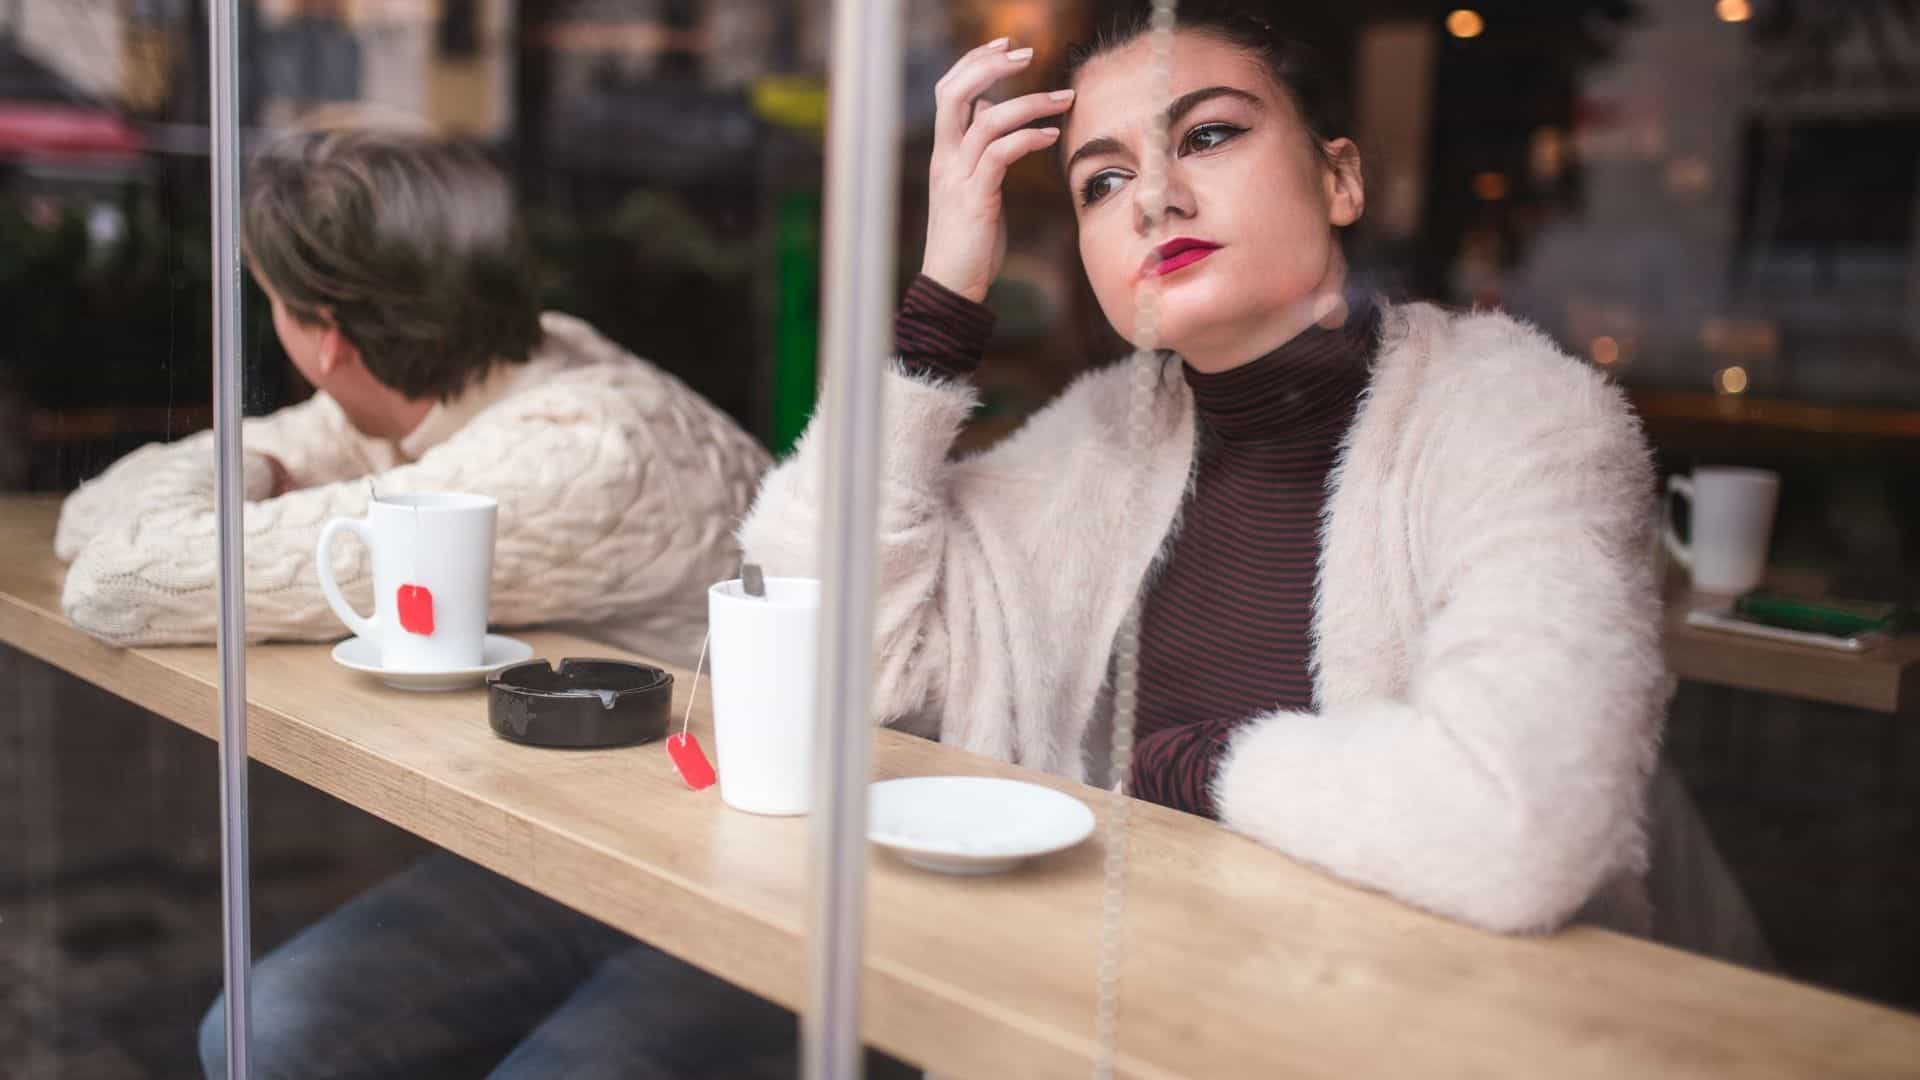 A distraught couple at a coffee shop